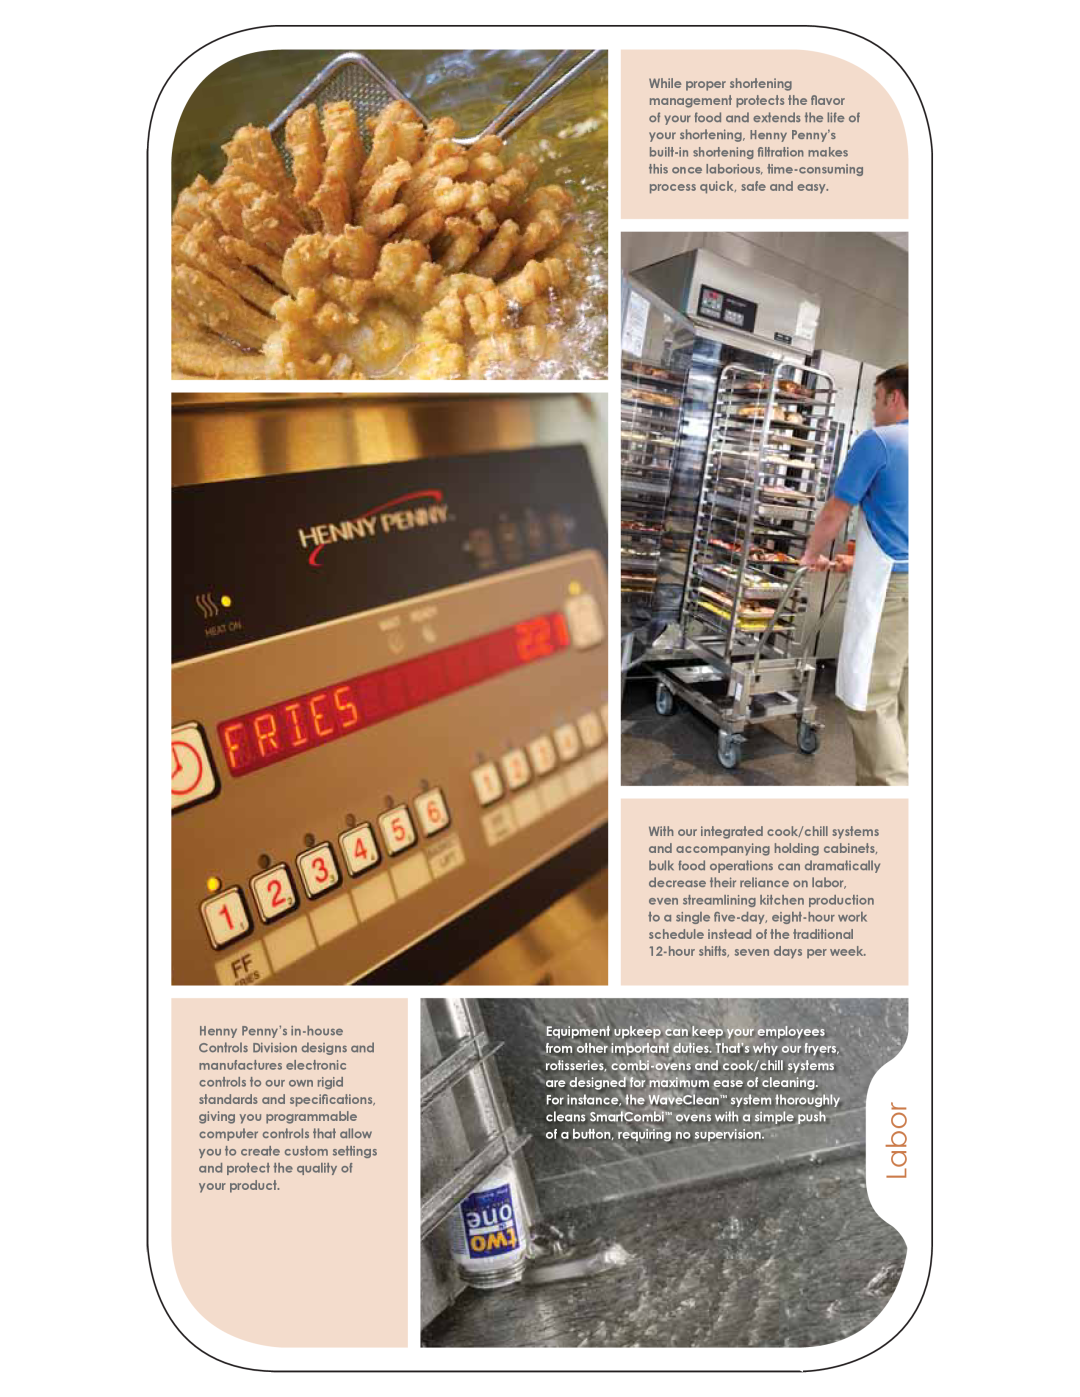 Henny Penny none manual Equipment upkeep can keep your employees, rotisseries, combi-ovensand cook/chill systems 